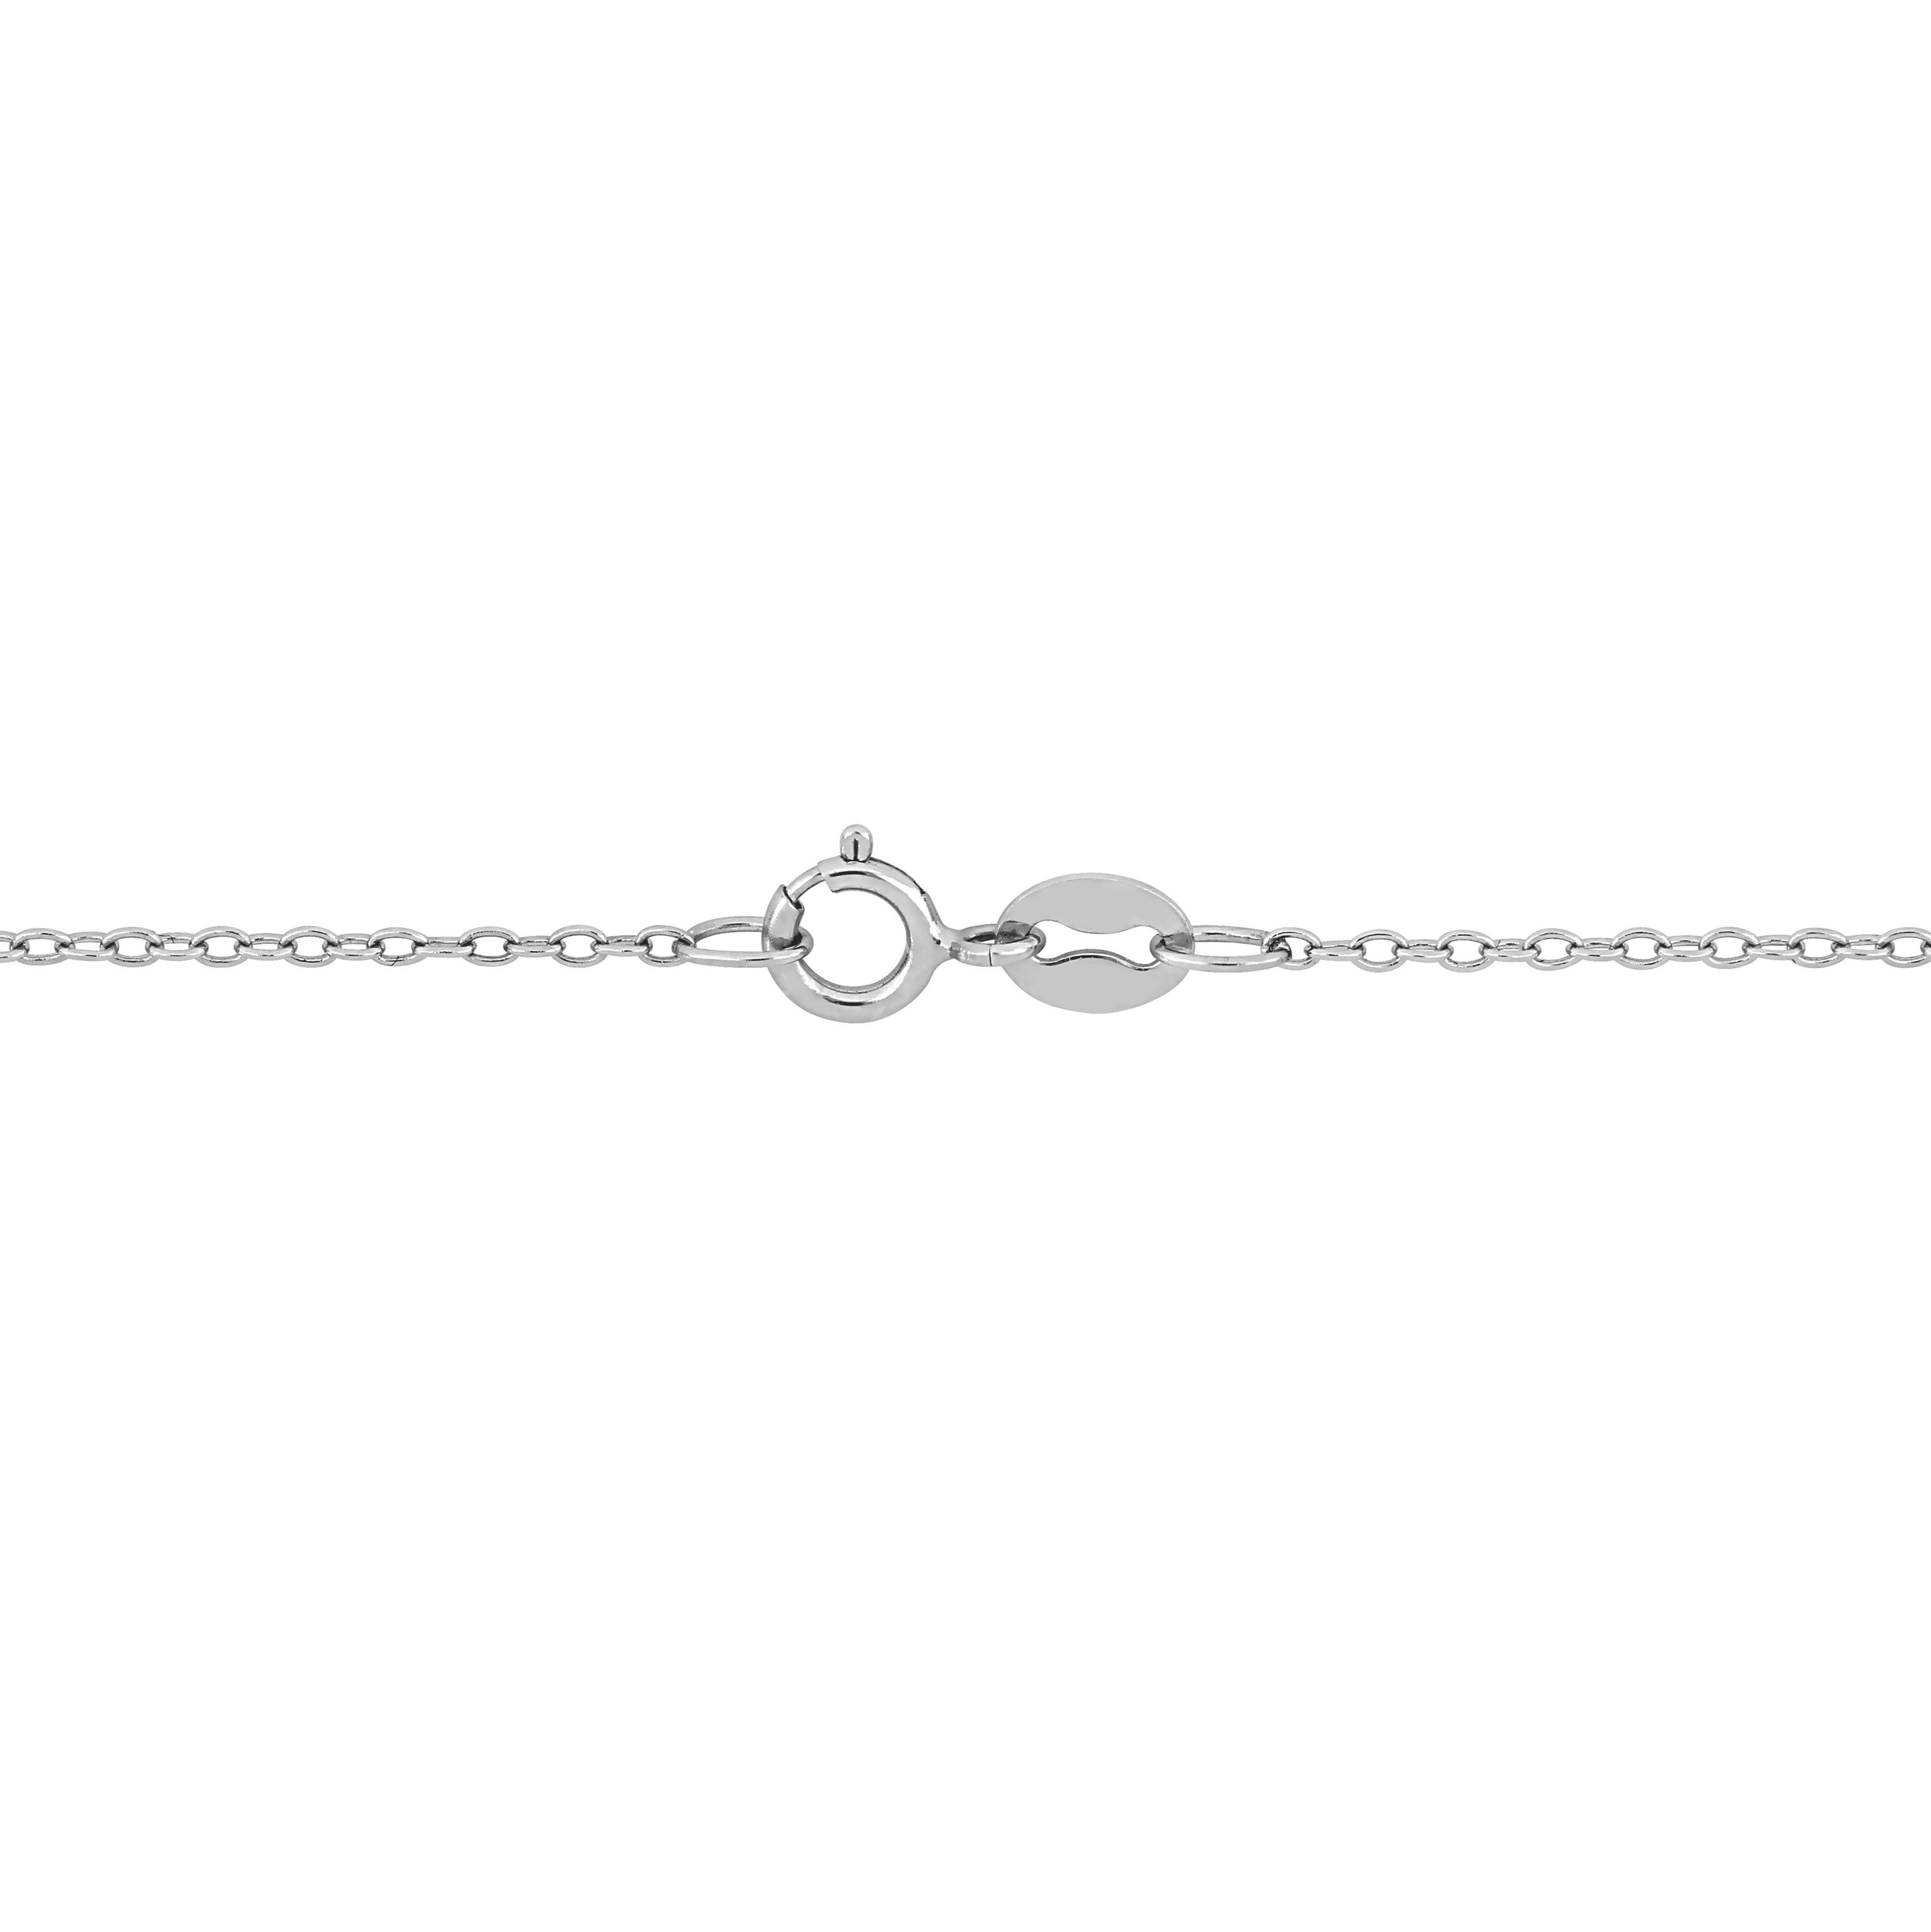 8-9 MM Cultured Freshwater Pearl Infinity Lariat Necklace in Sterling Silver - 18 in.